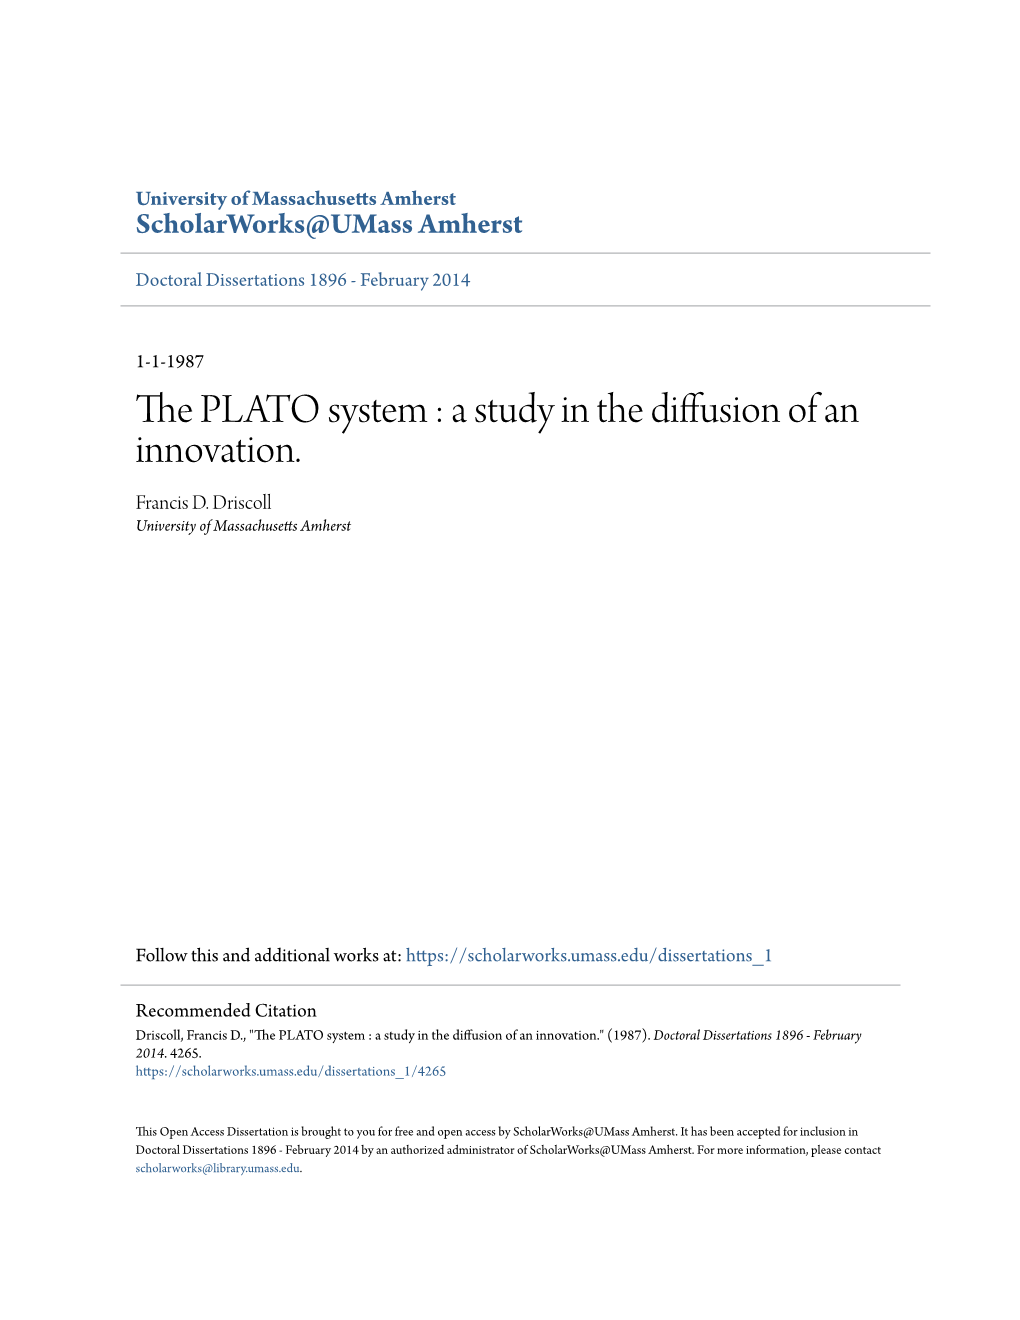 The PLATO System : a Study in the Diffusion of an Innovation